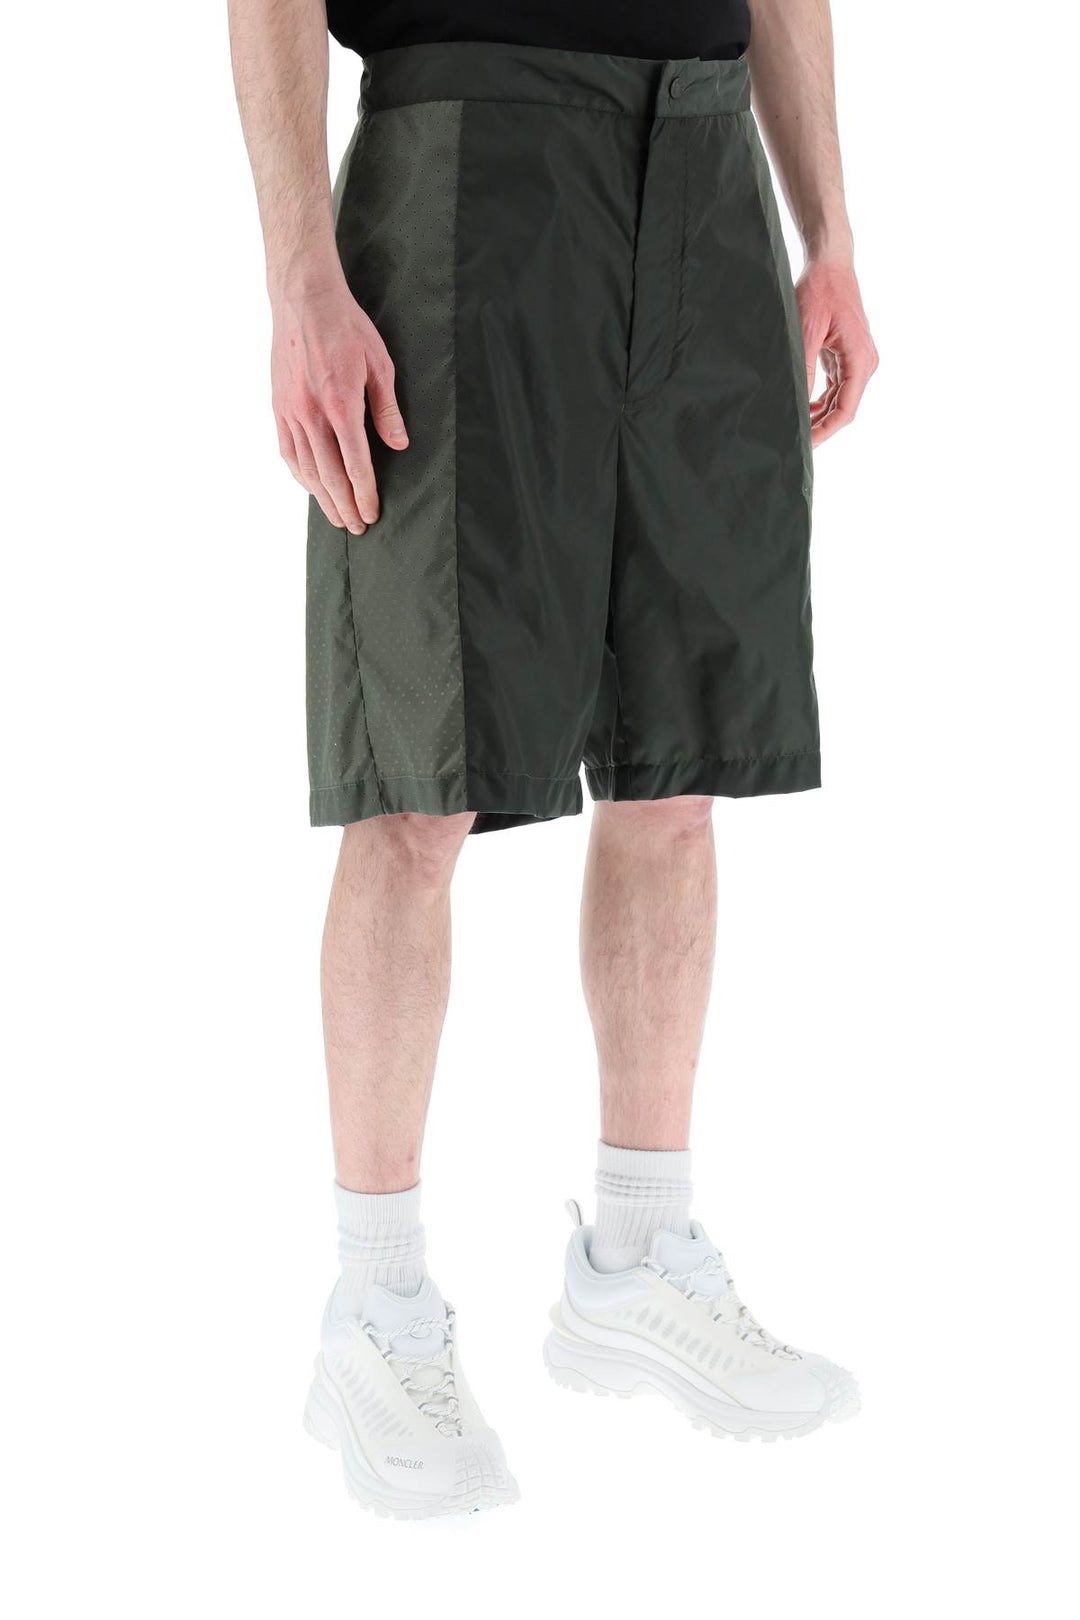 Moncler Born To Protect Perforated Nylon Shorts   Verde